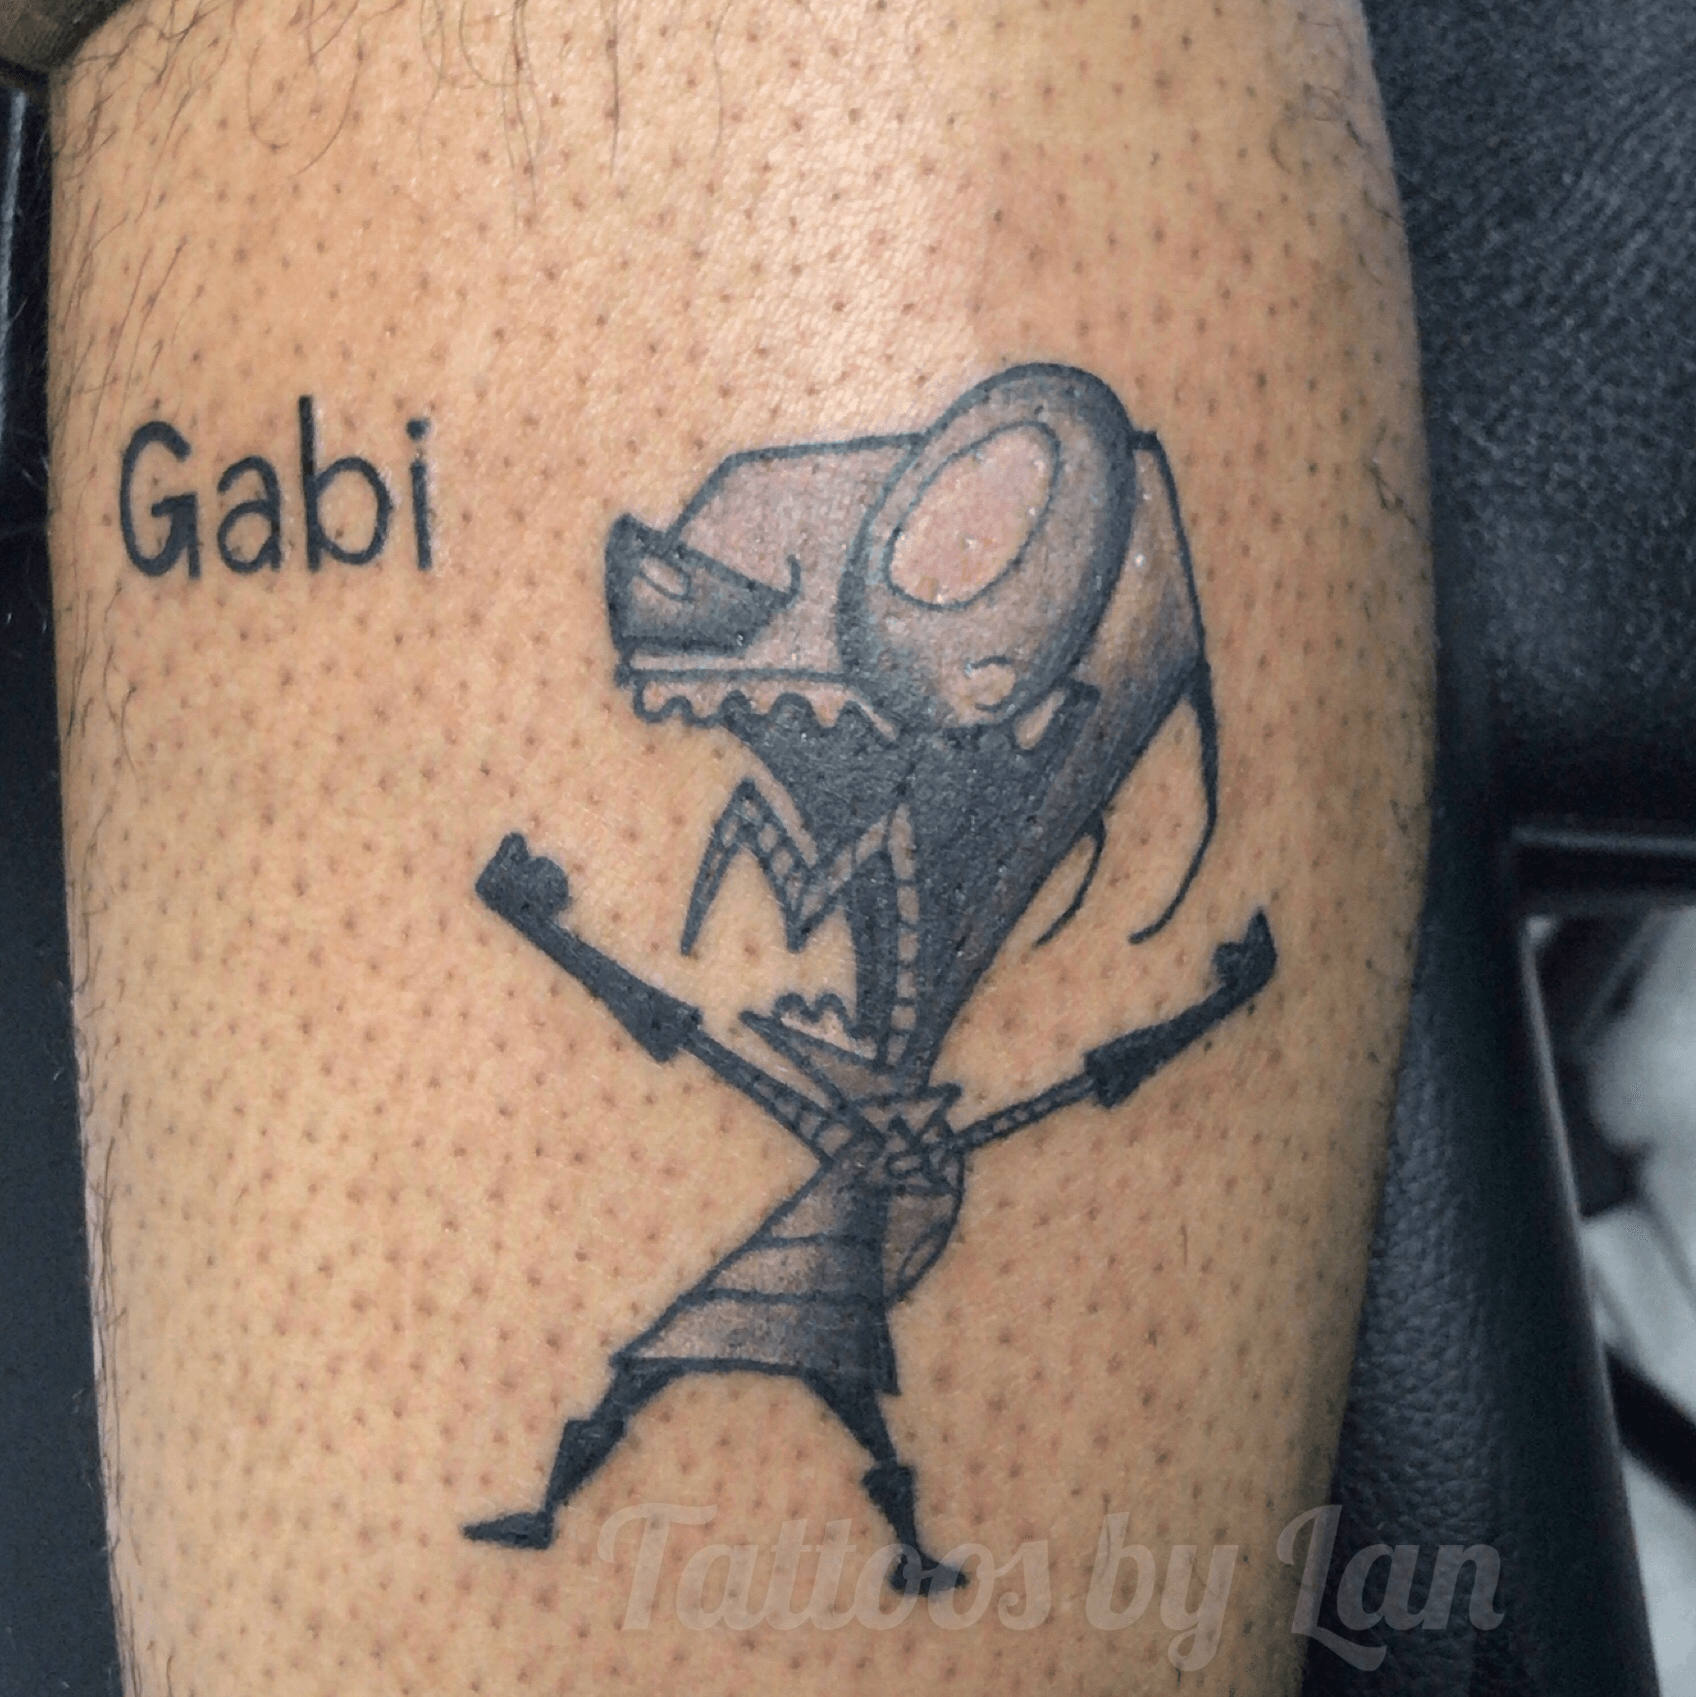 Invader Zim Done by Mike at 405 Studio in OKC  rtattoo